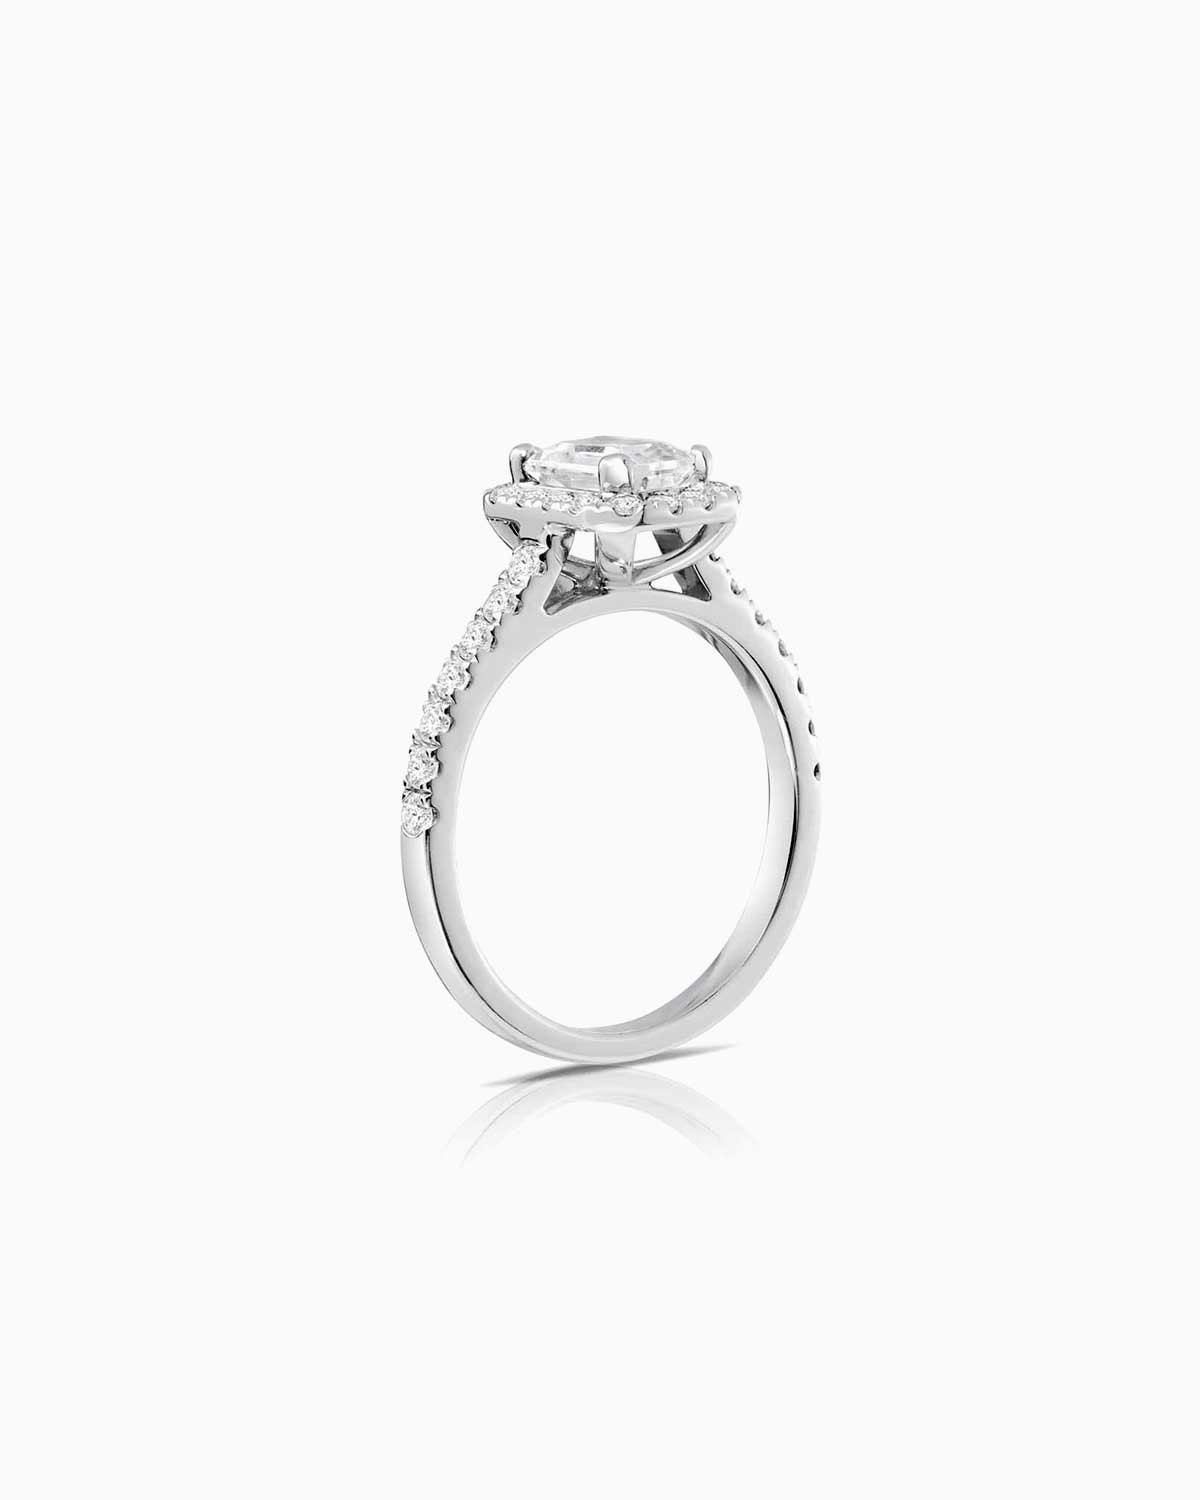 emerald cut halo diamond engagement ring set in 18 karat white gold by claude and me jewellery